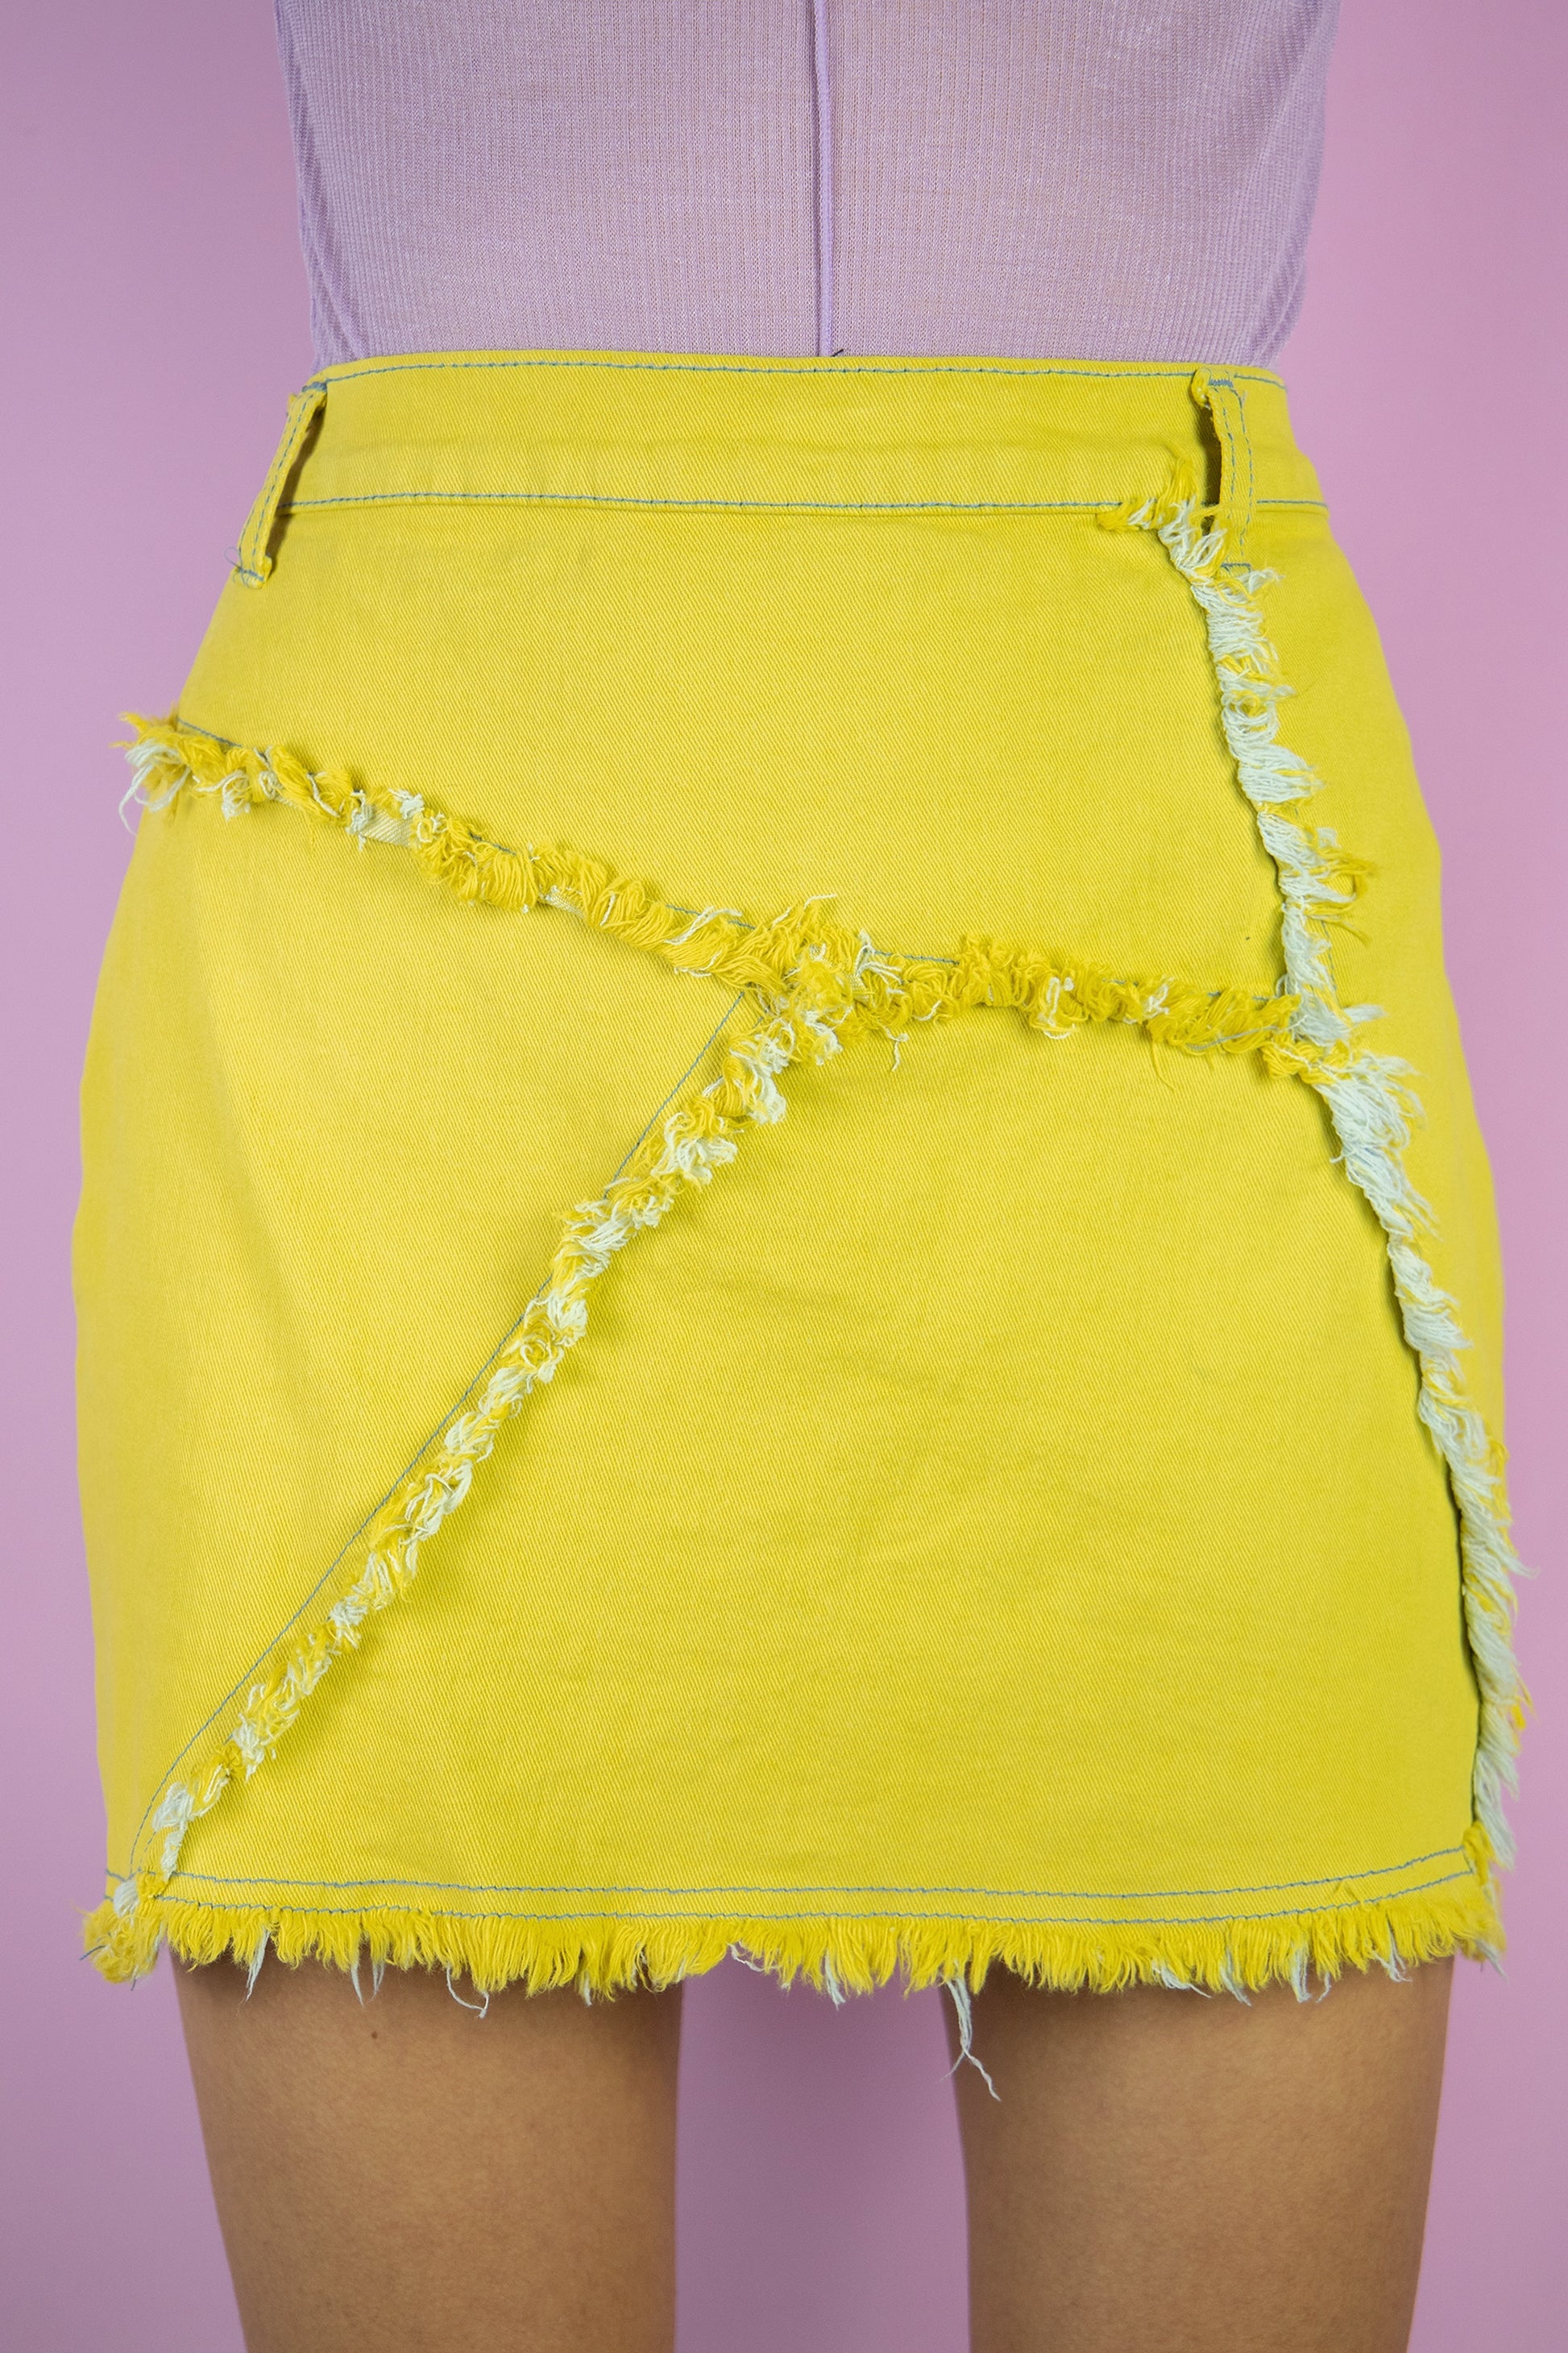 The Y2K Cyber Yellow Mini Skirt is a vintage stretchy yellow asymmetric skirt with frayed raw-edge detail. Subversive grunge 2000s mini skirt.